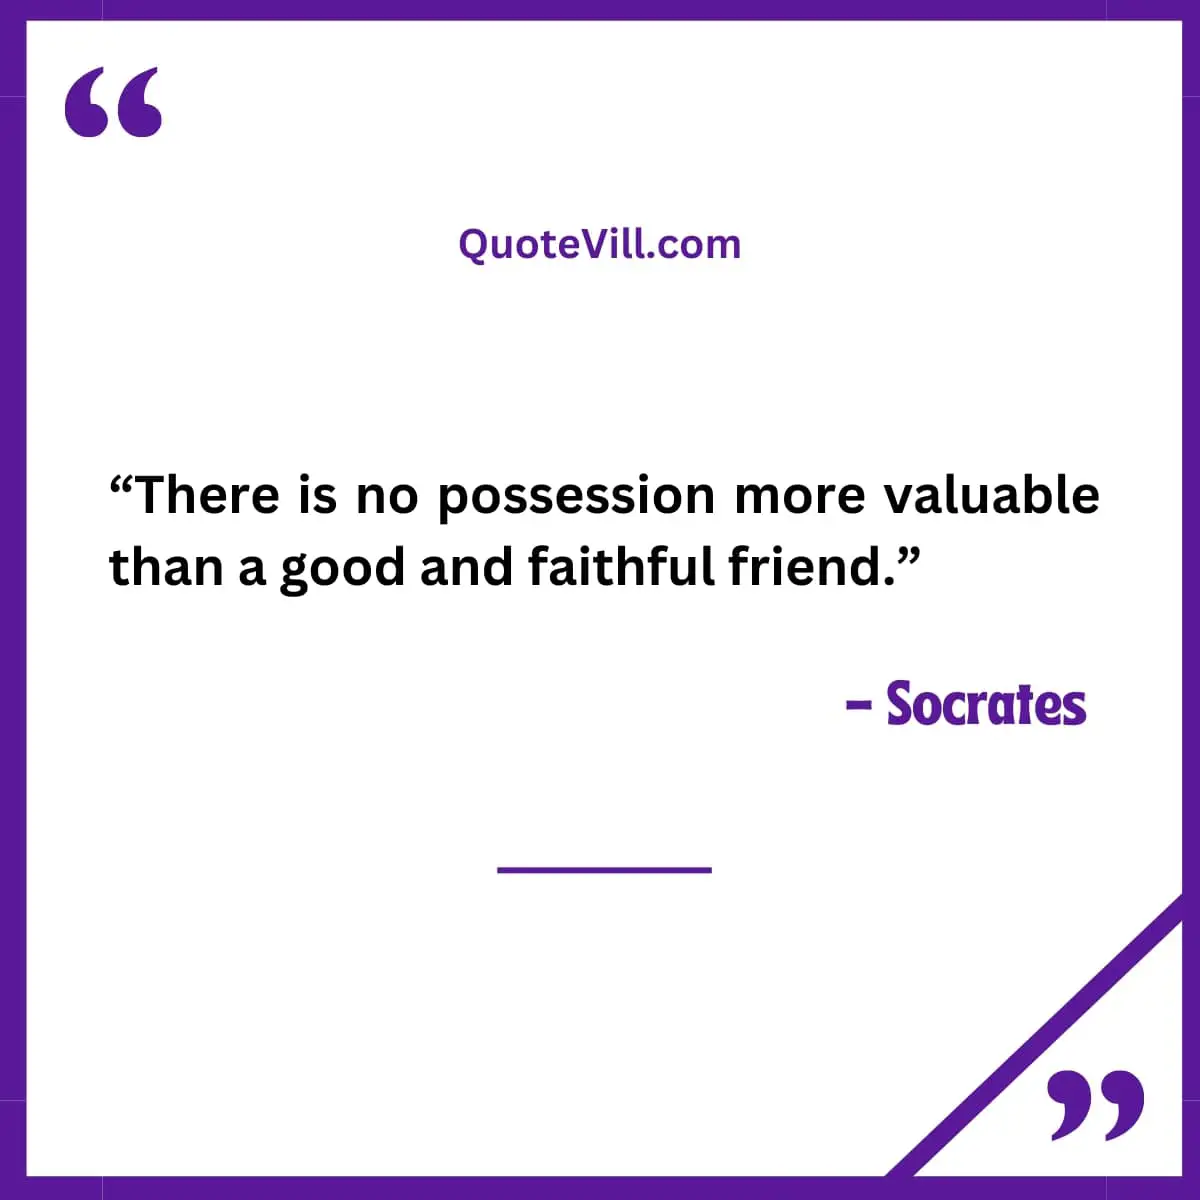 Socrates Quotes On Life and Happiness